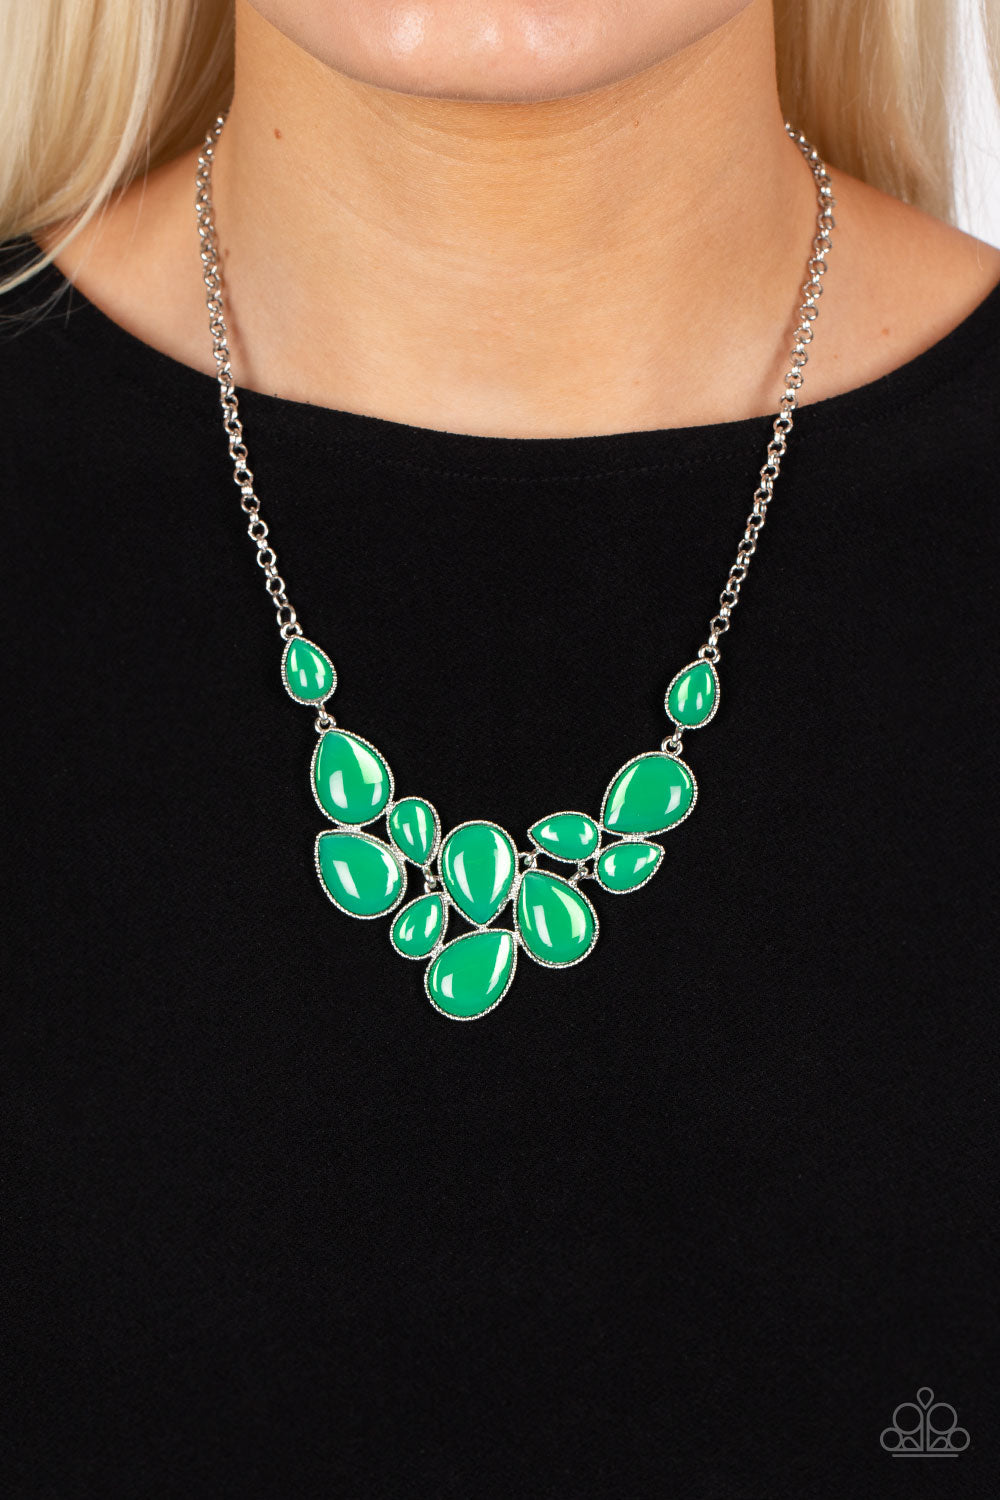 Keeps GLOWING and GLOWING - green - Paparazzi necklace